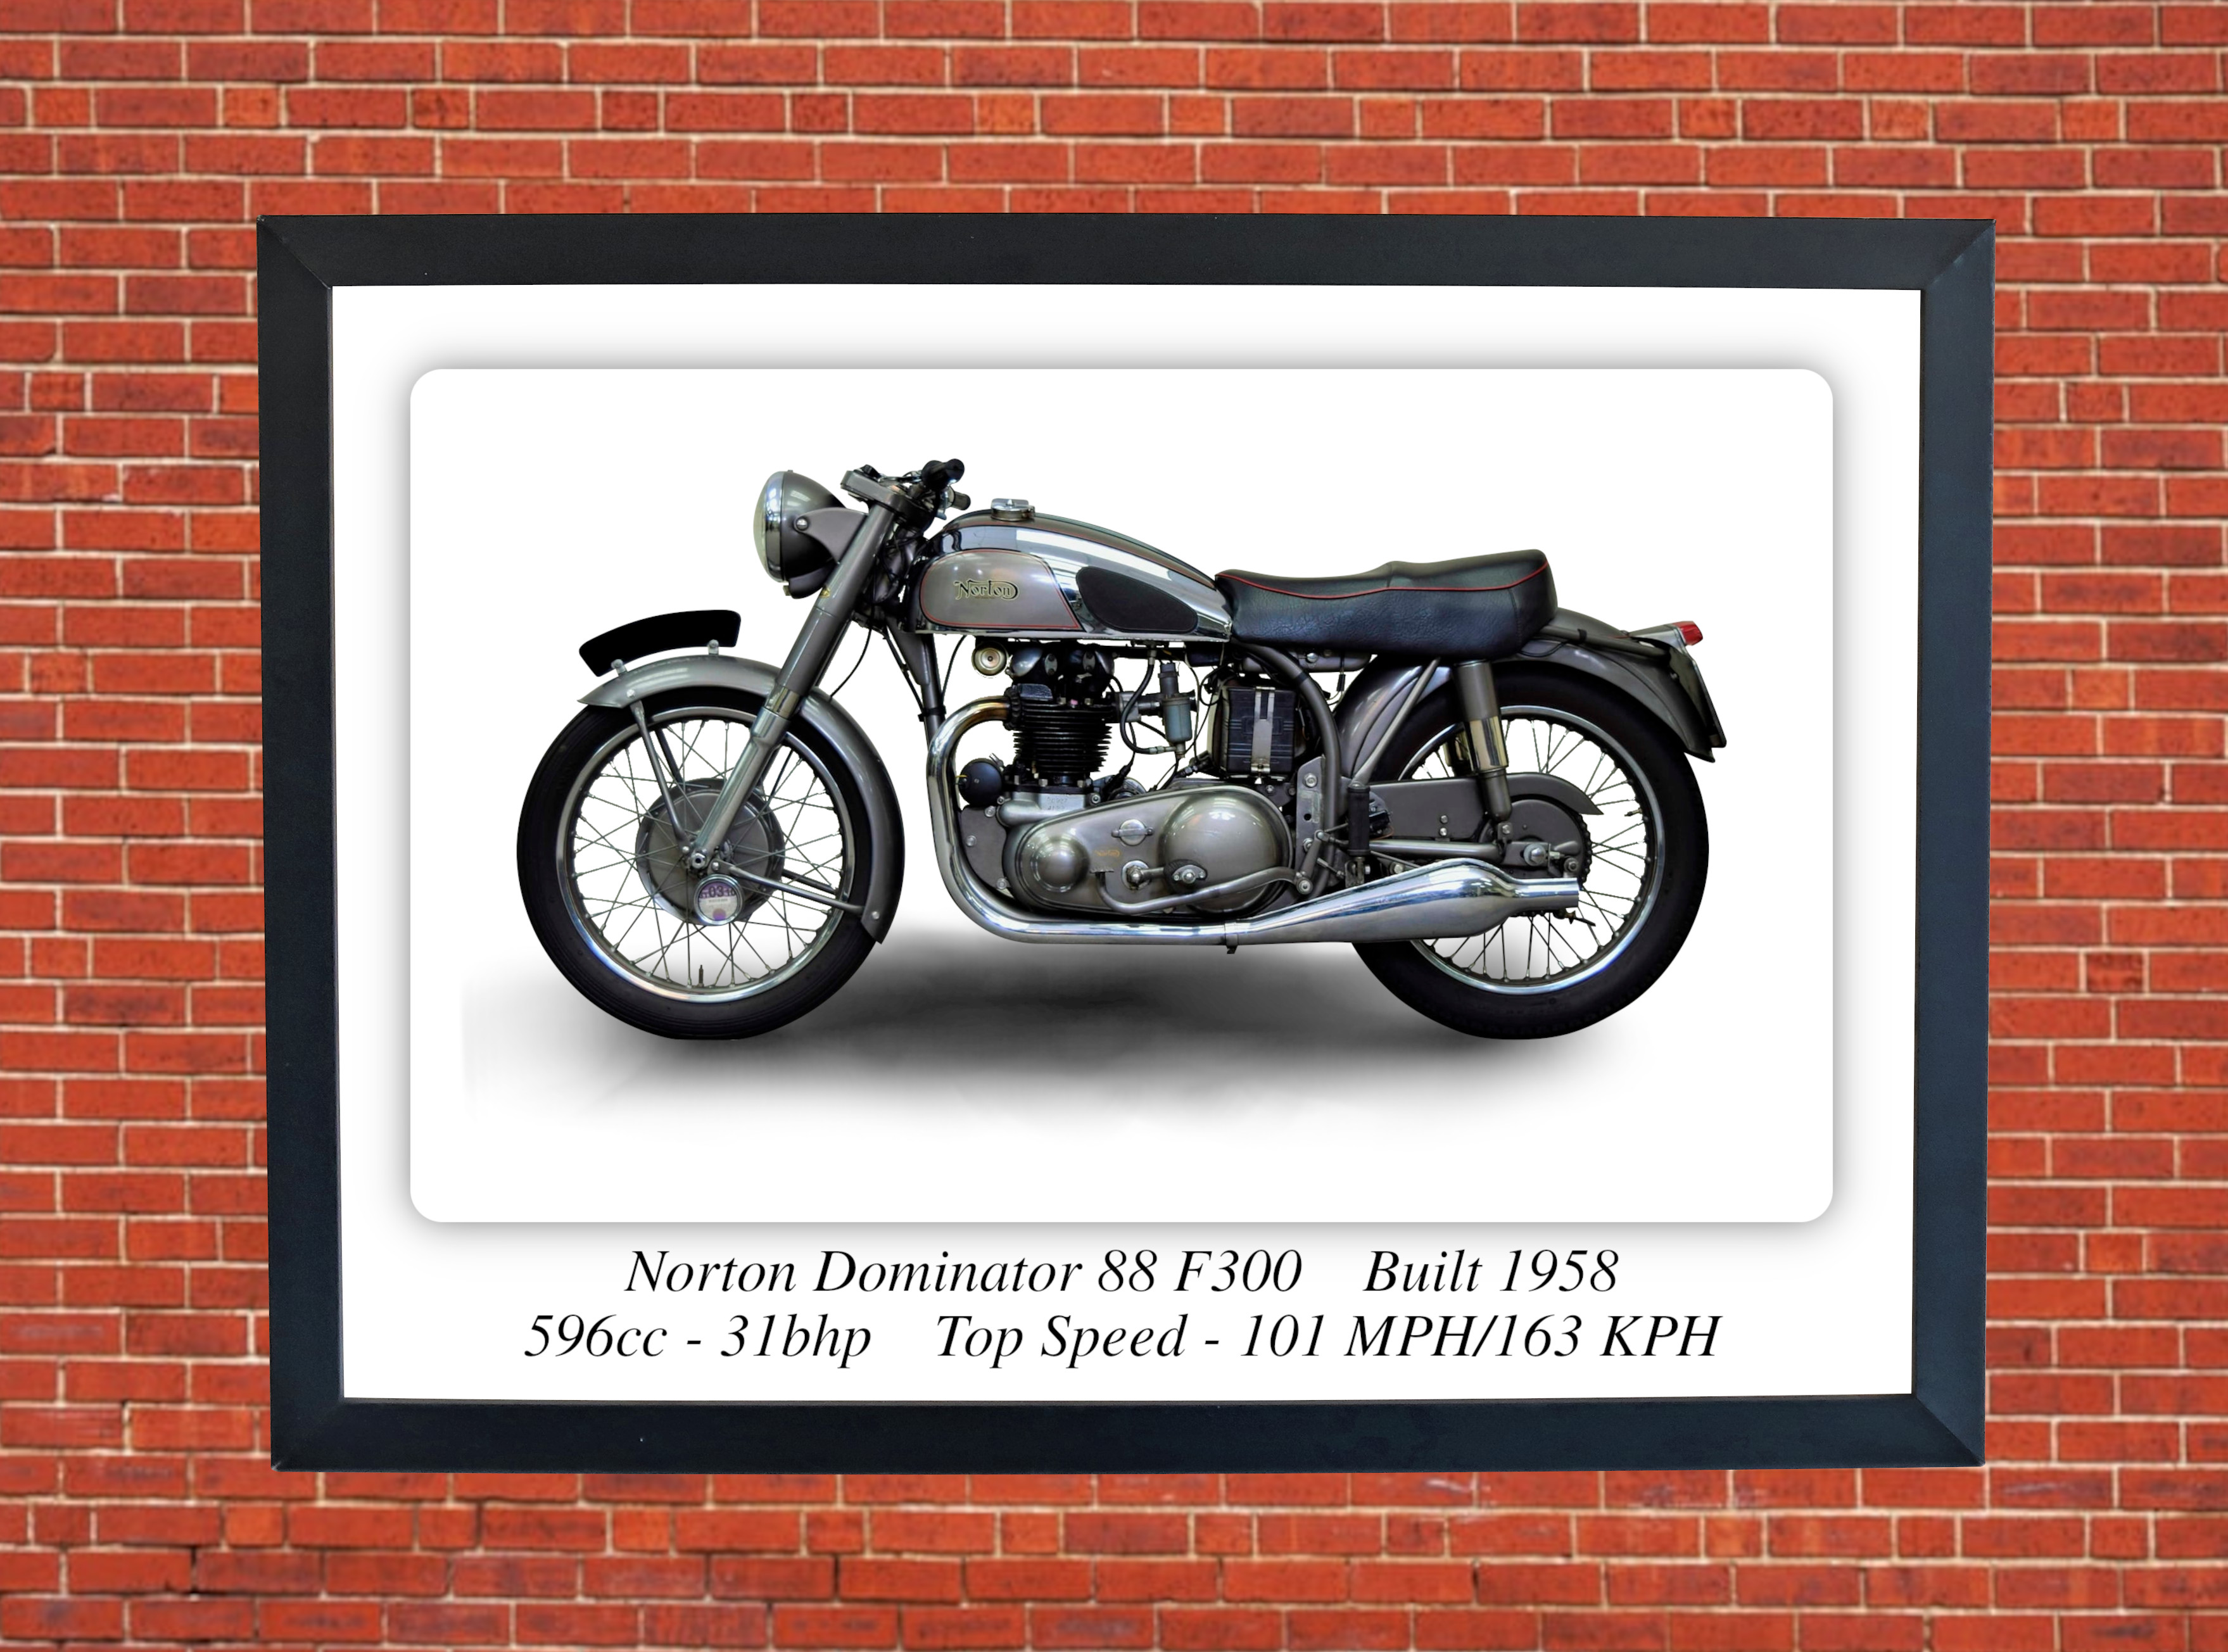 Norton Dominator 88 F300 Motorcycle - A3/A4 Size Print Poster